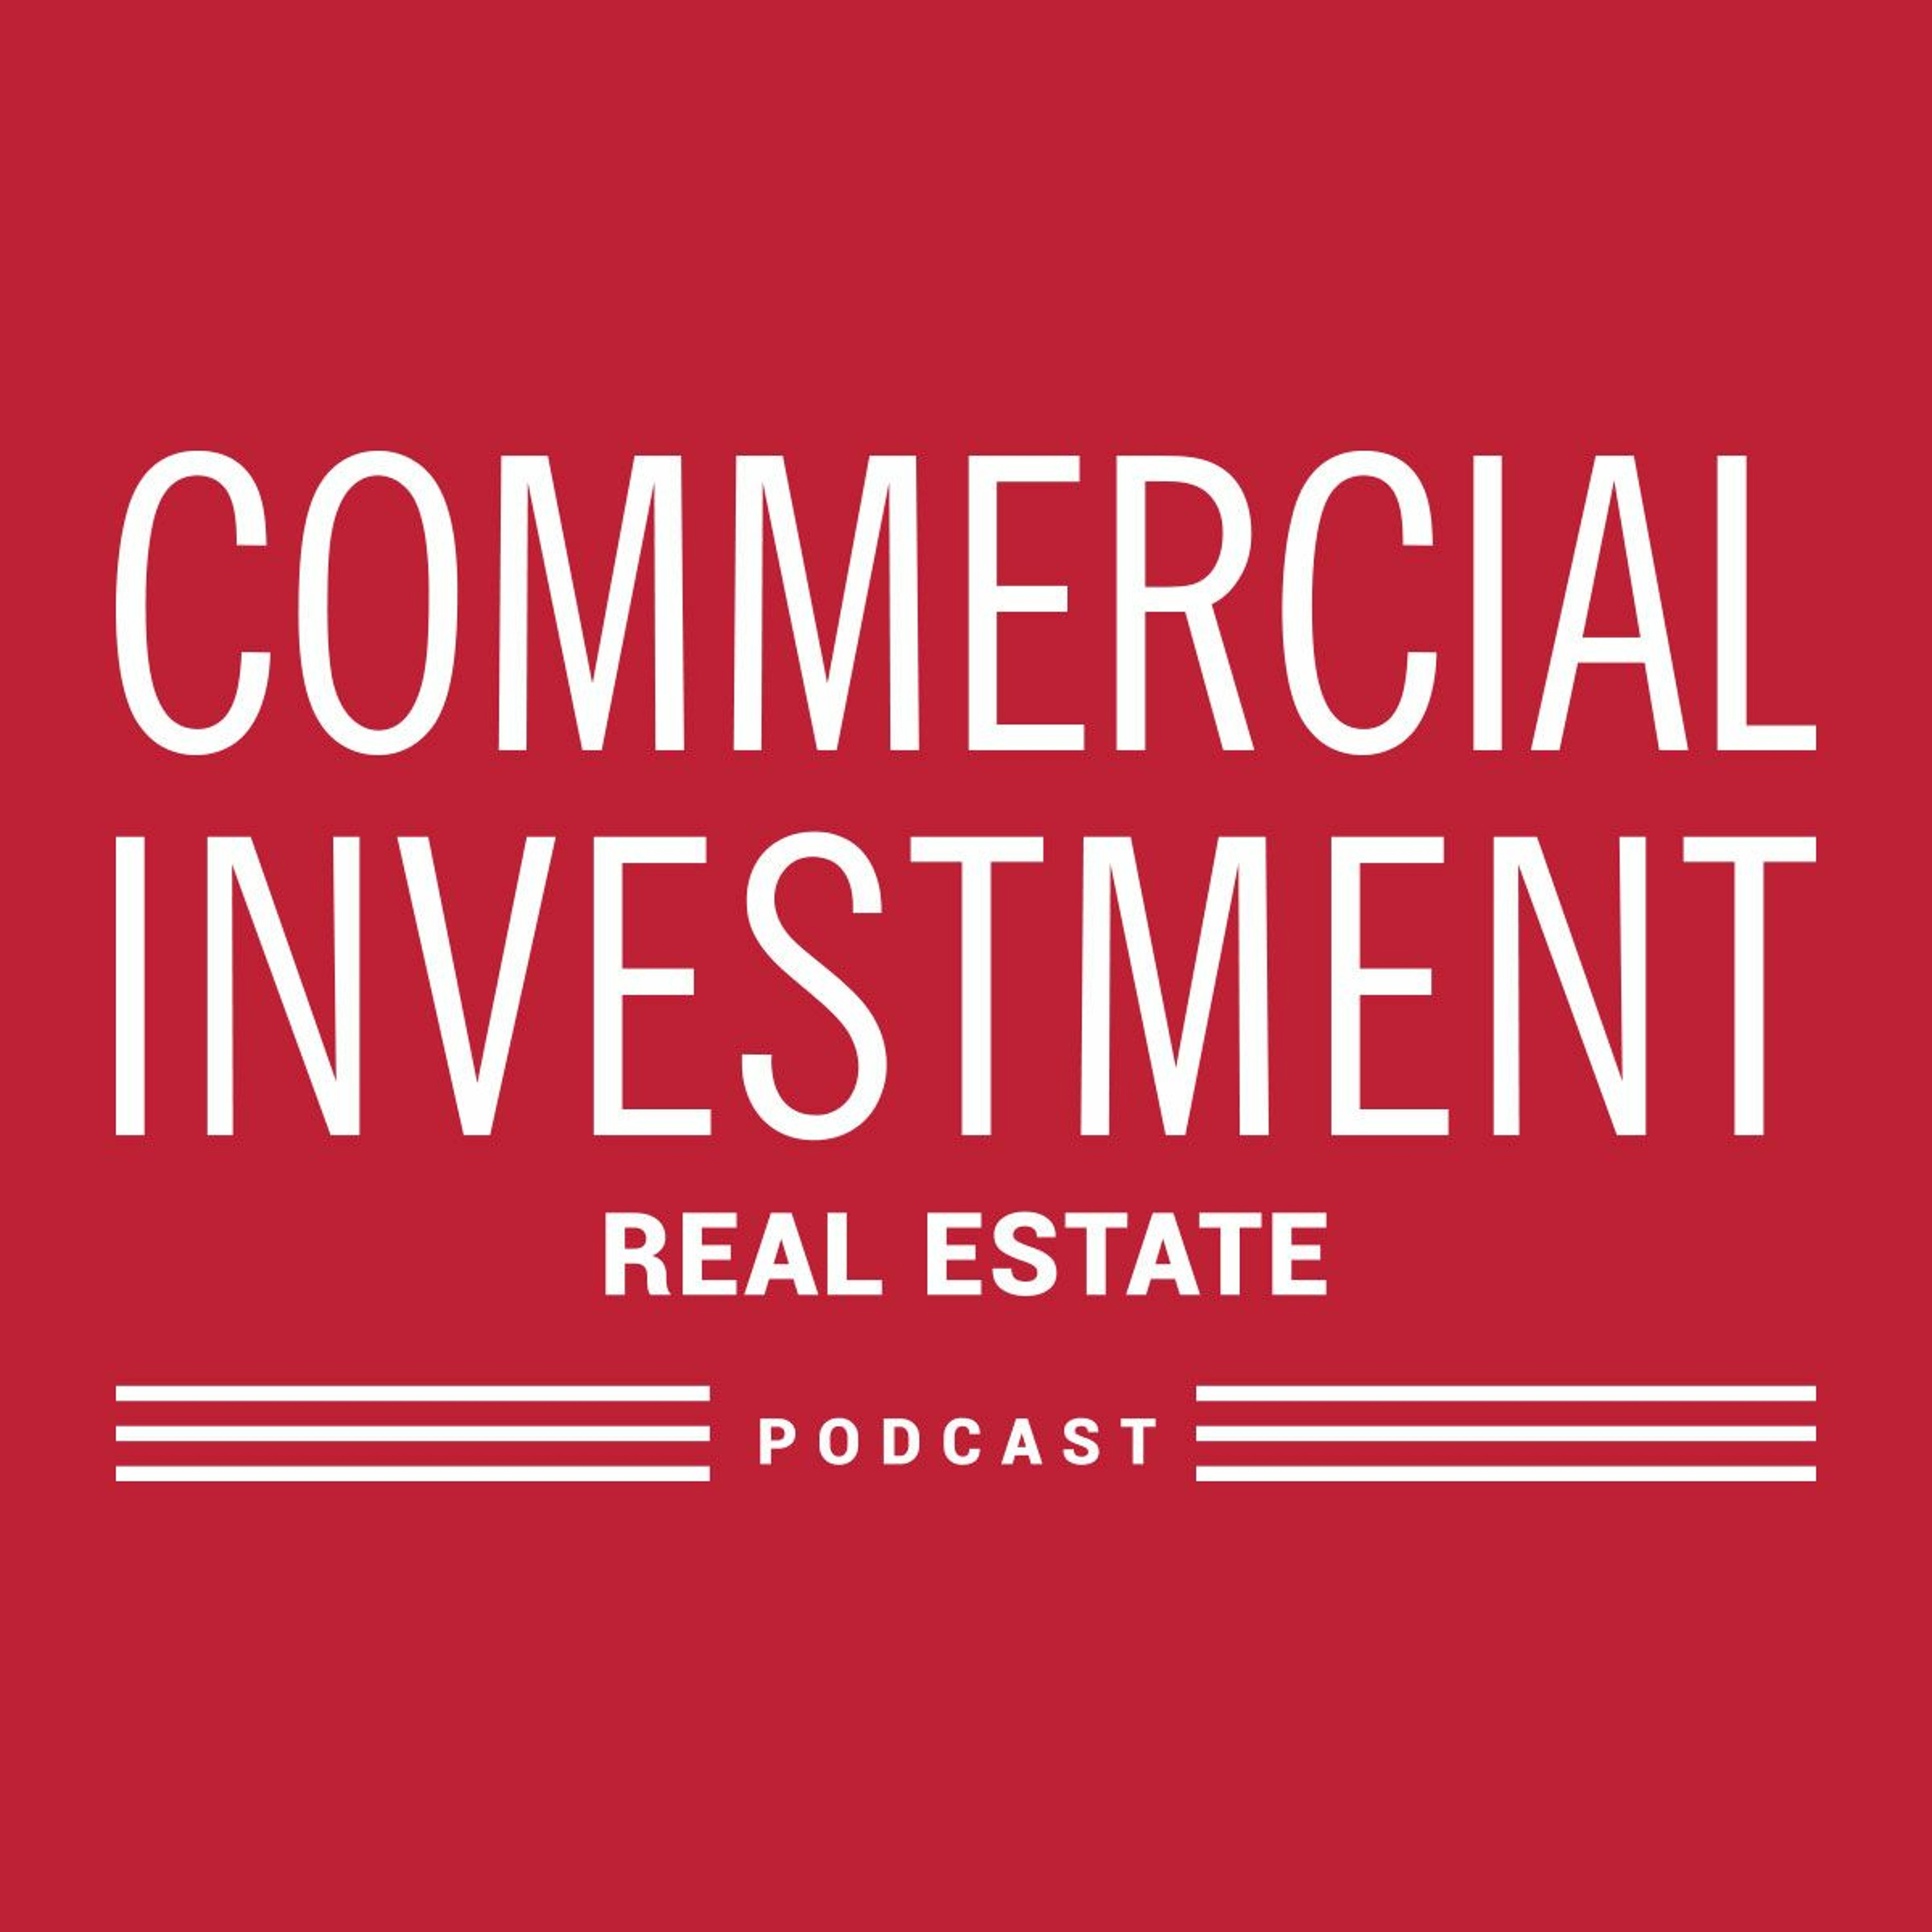 A Discussion on the Top 10 Issues in Commercial Real Estate with Kathleen Rose, CCIM, CRE